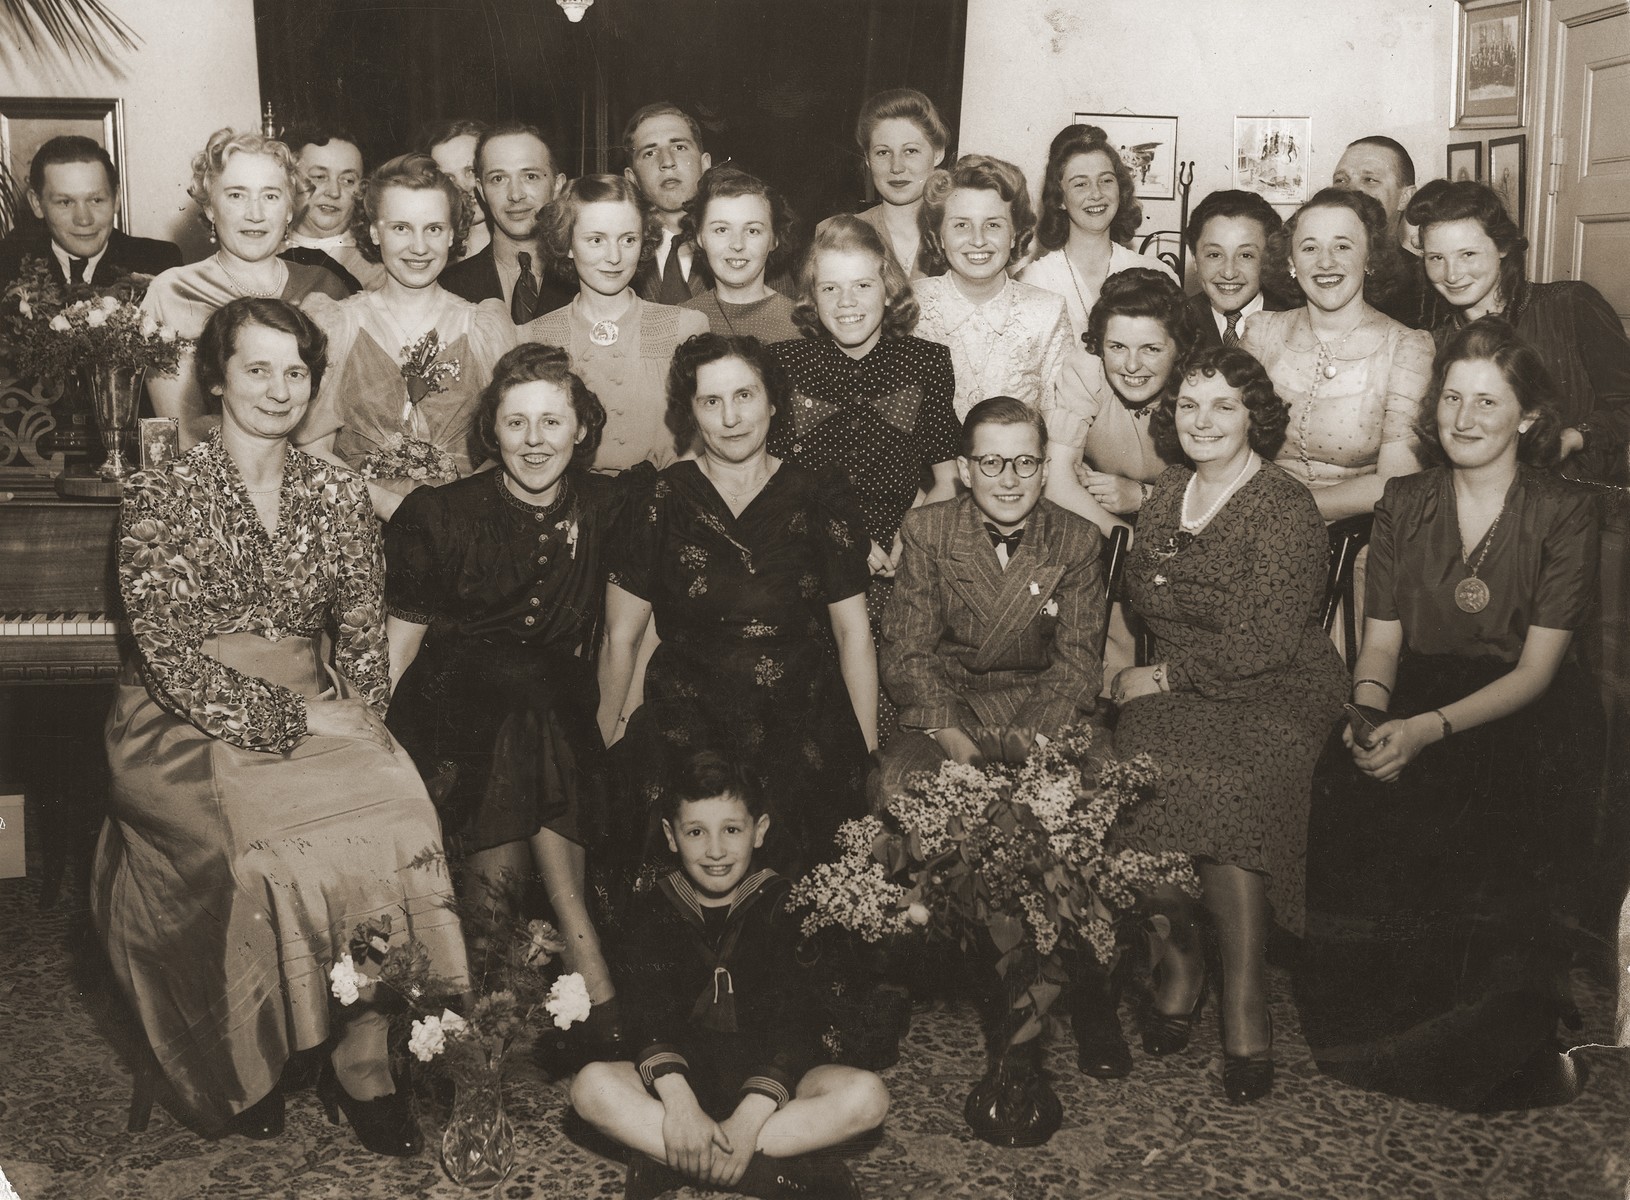 Piano students, both adults and children, pose at their piano recital.  Seated on the floor is Gus Goldberger.  Standing fourth from right is Milan Goldberger.